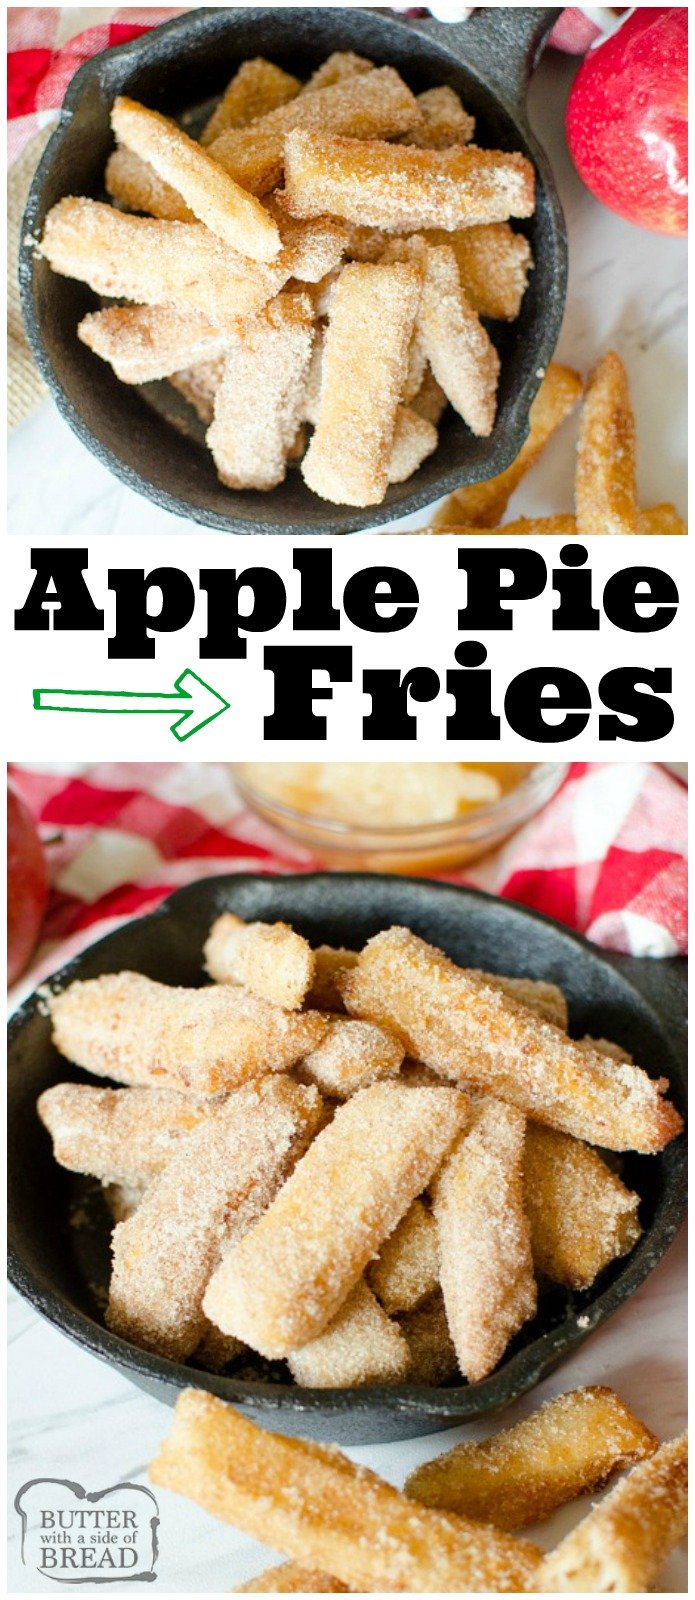 Apple Pie Fries are small strips of apple pie with a flaky crust and a simple applesauce filling. The Apple Pie Fries are fried and then tossed in cinnamon and sugar to complete this sweet, Fall time dessert. #apples #applepie #dessert #Fall #baking #cinnamon #friedapples #recipe for BUTTER WITH A SIDE OF BREAD